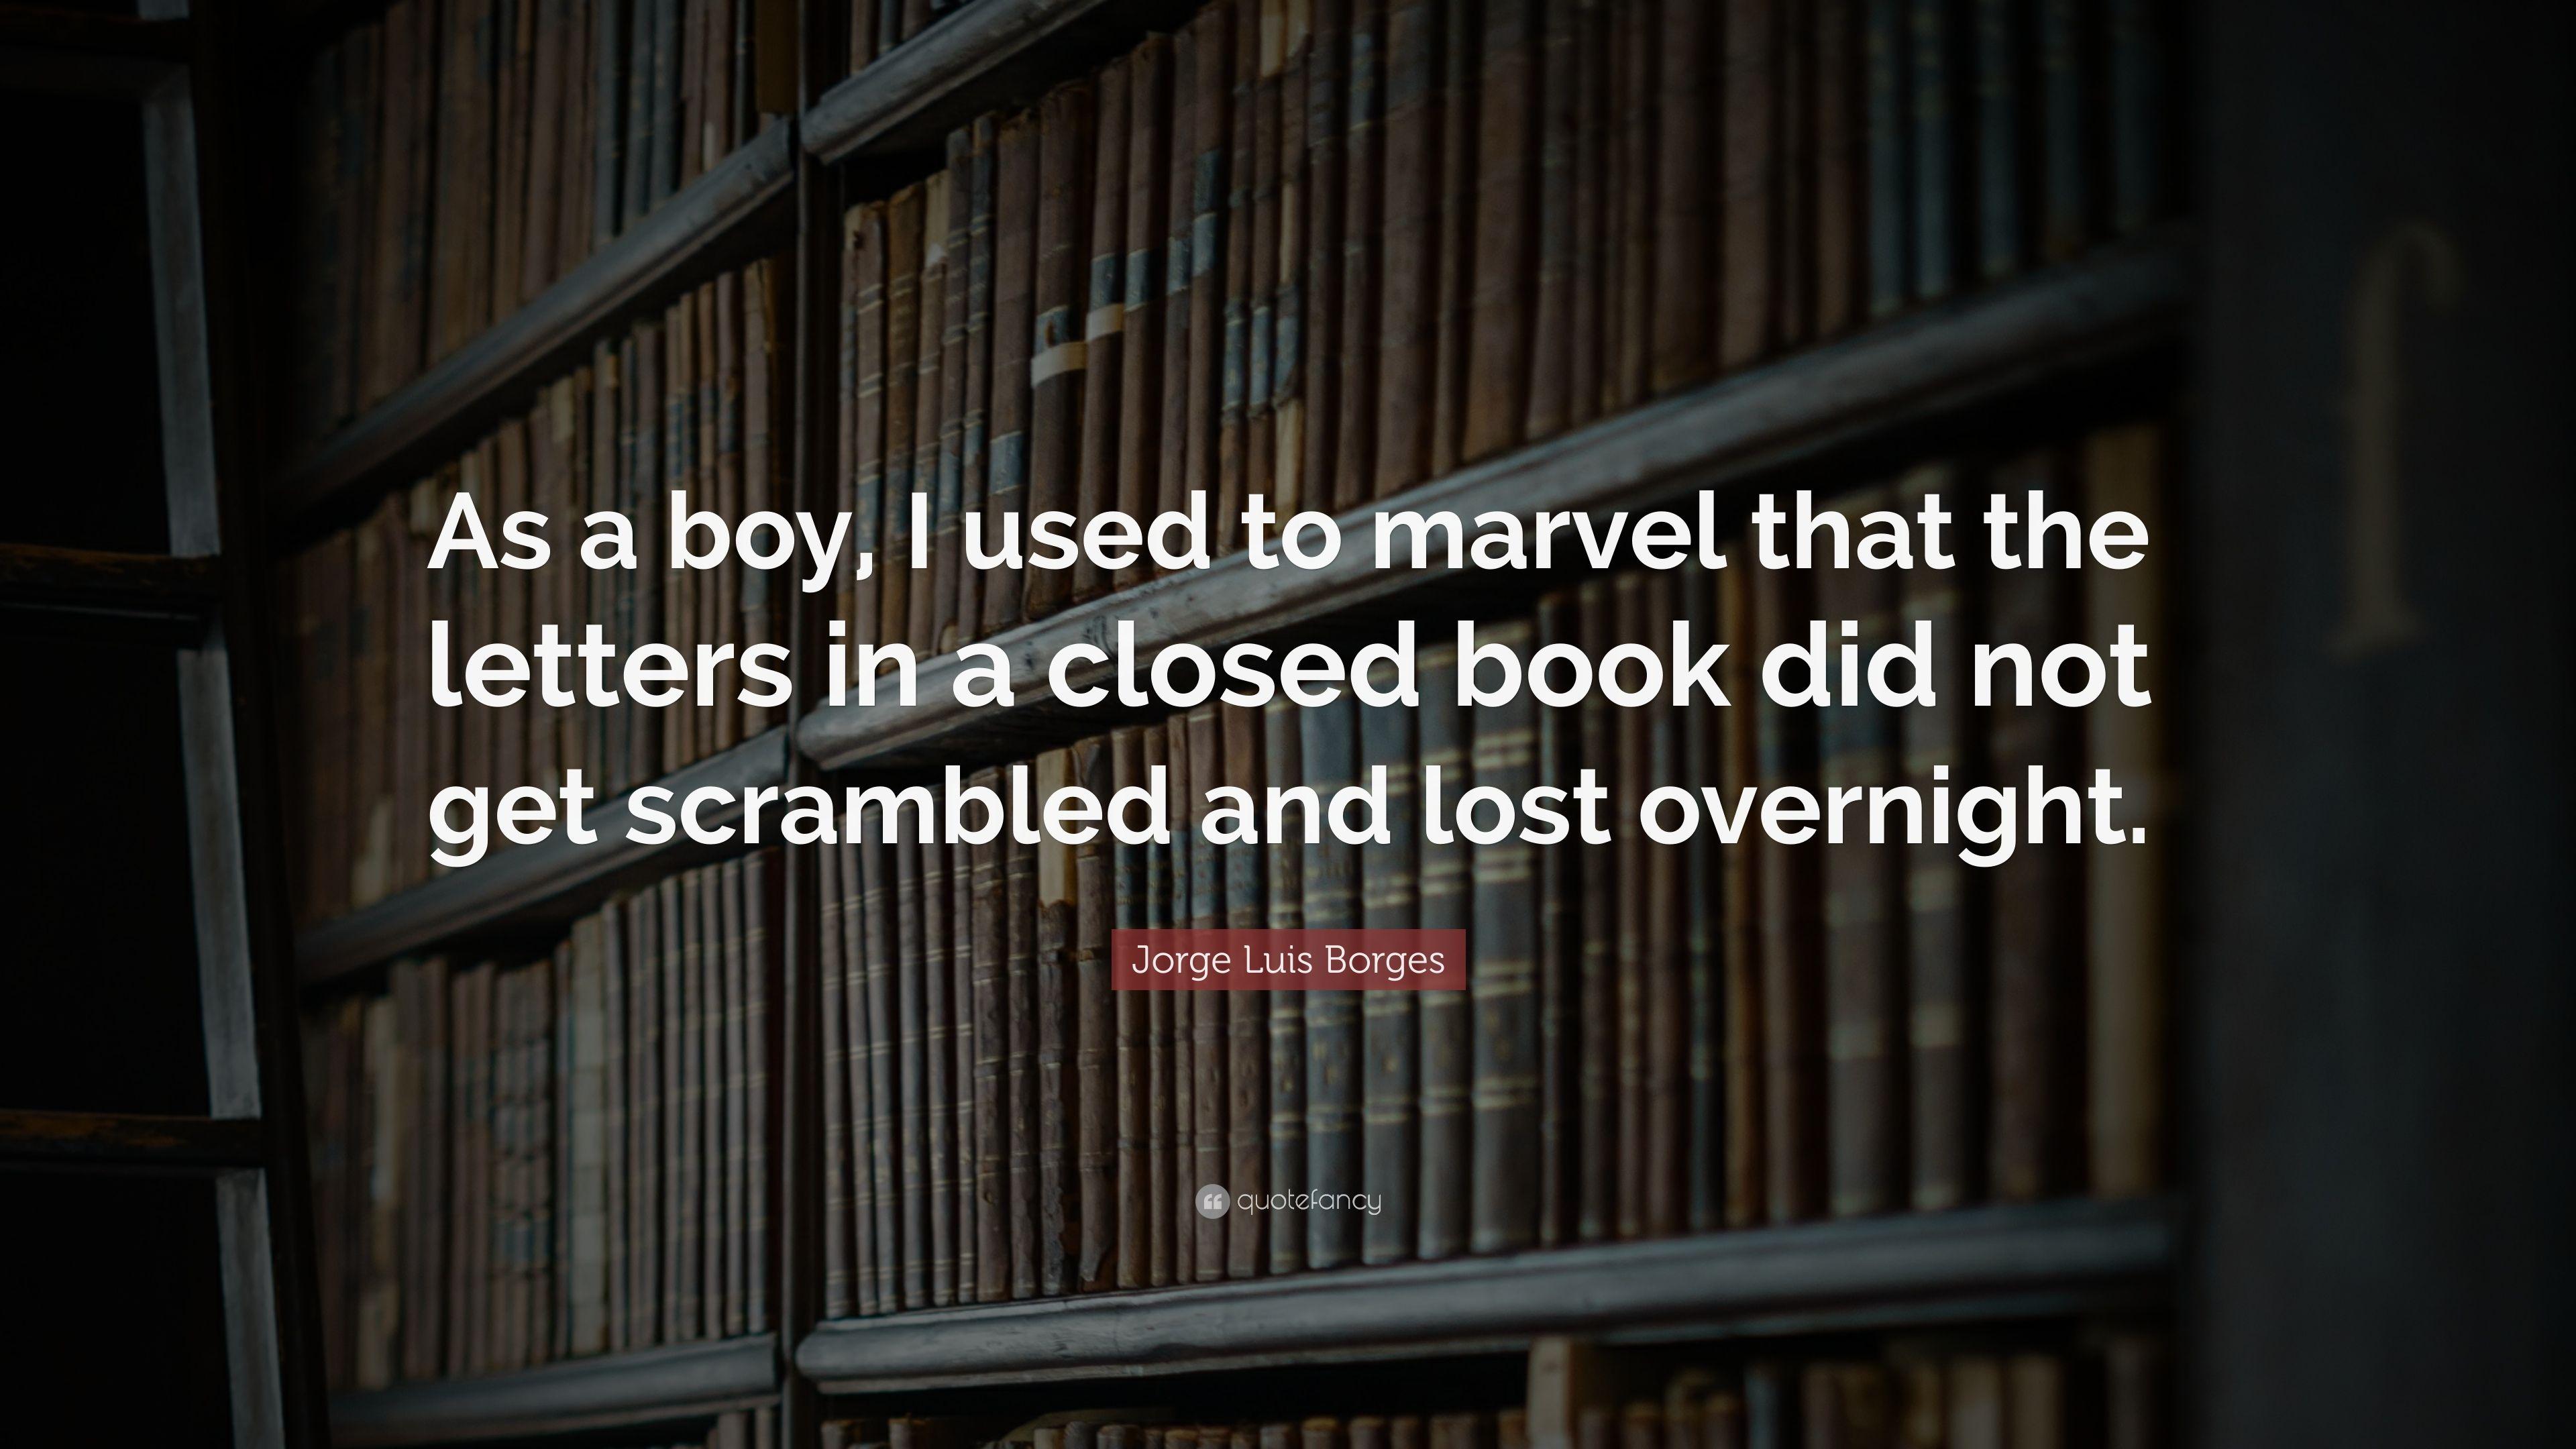 Jorge Luis Borges Quote: “As a boy, I used to marvel that